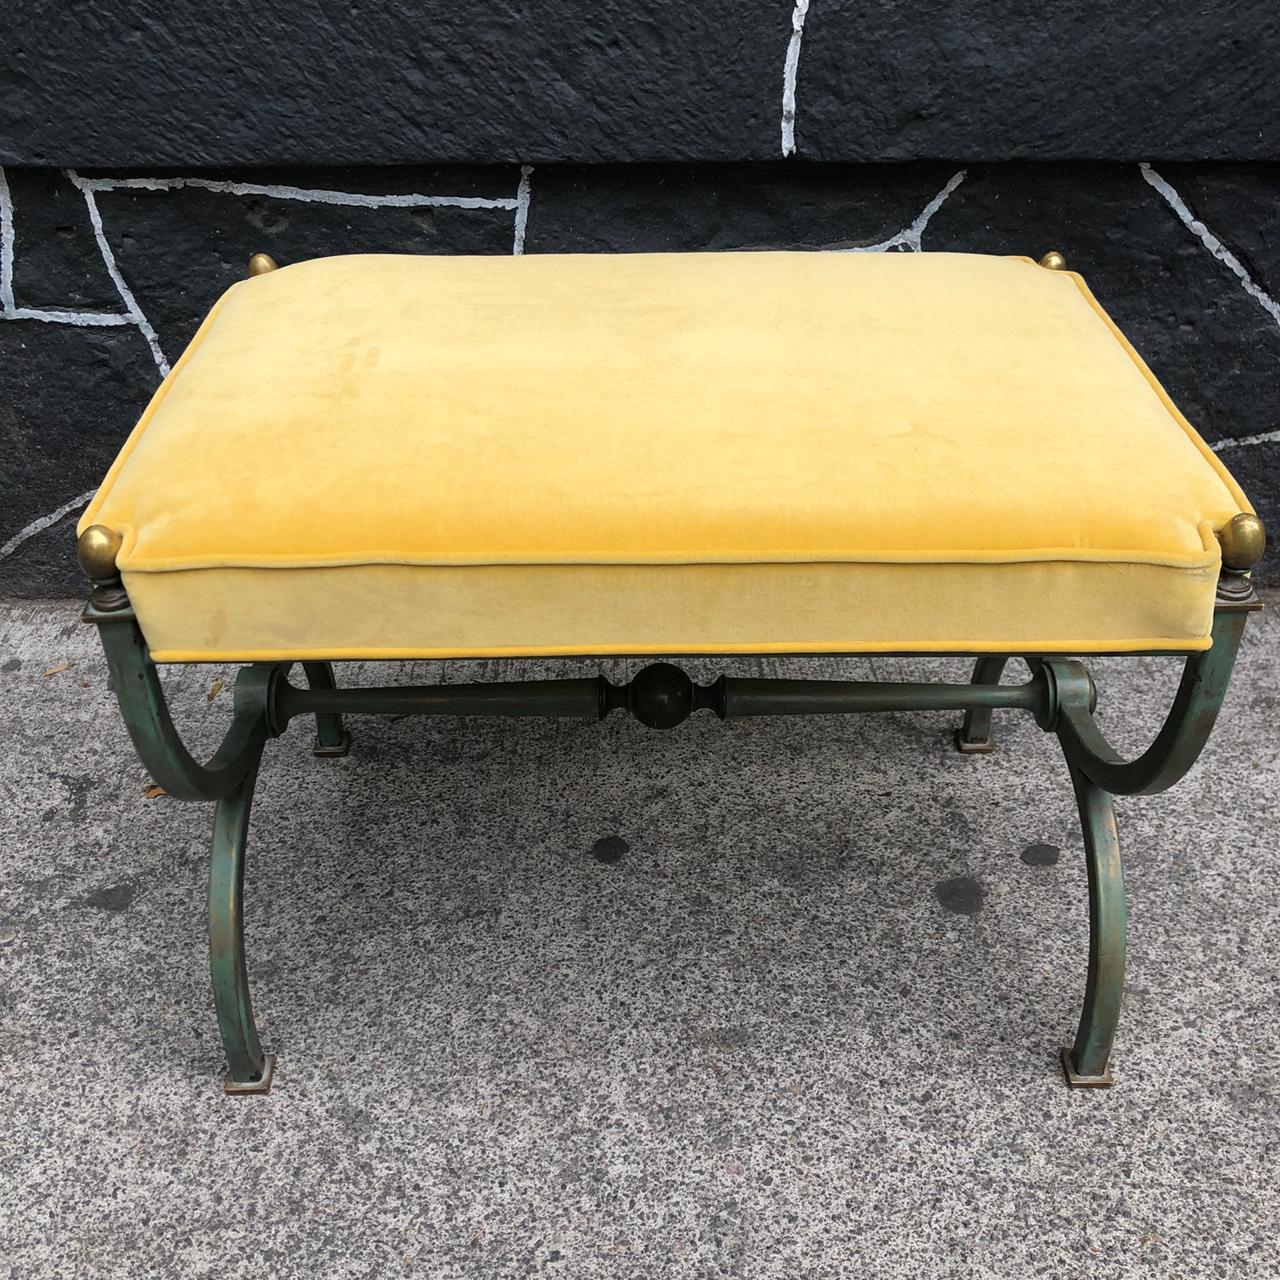 Mid-20th Century Arturo Pani Patinated Steel Stool with Yellow Upholstery